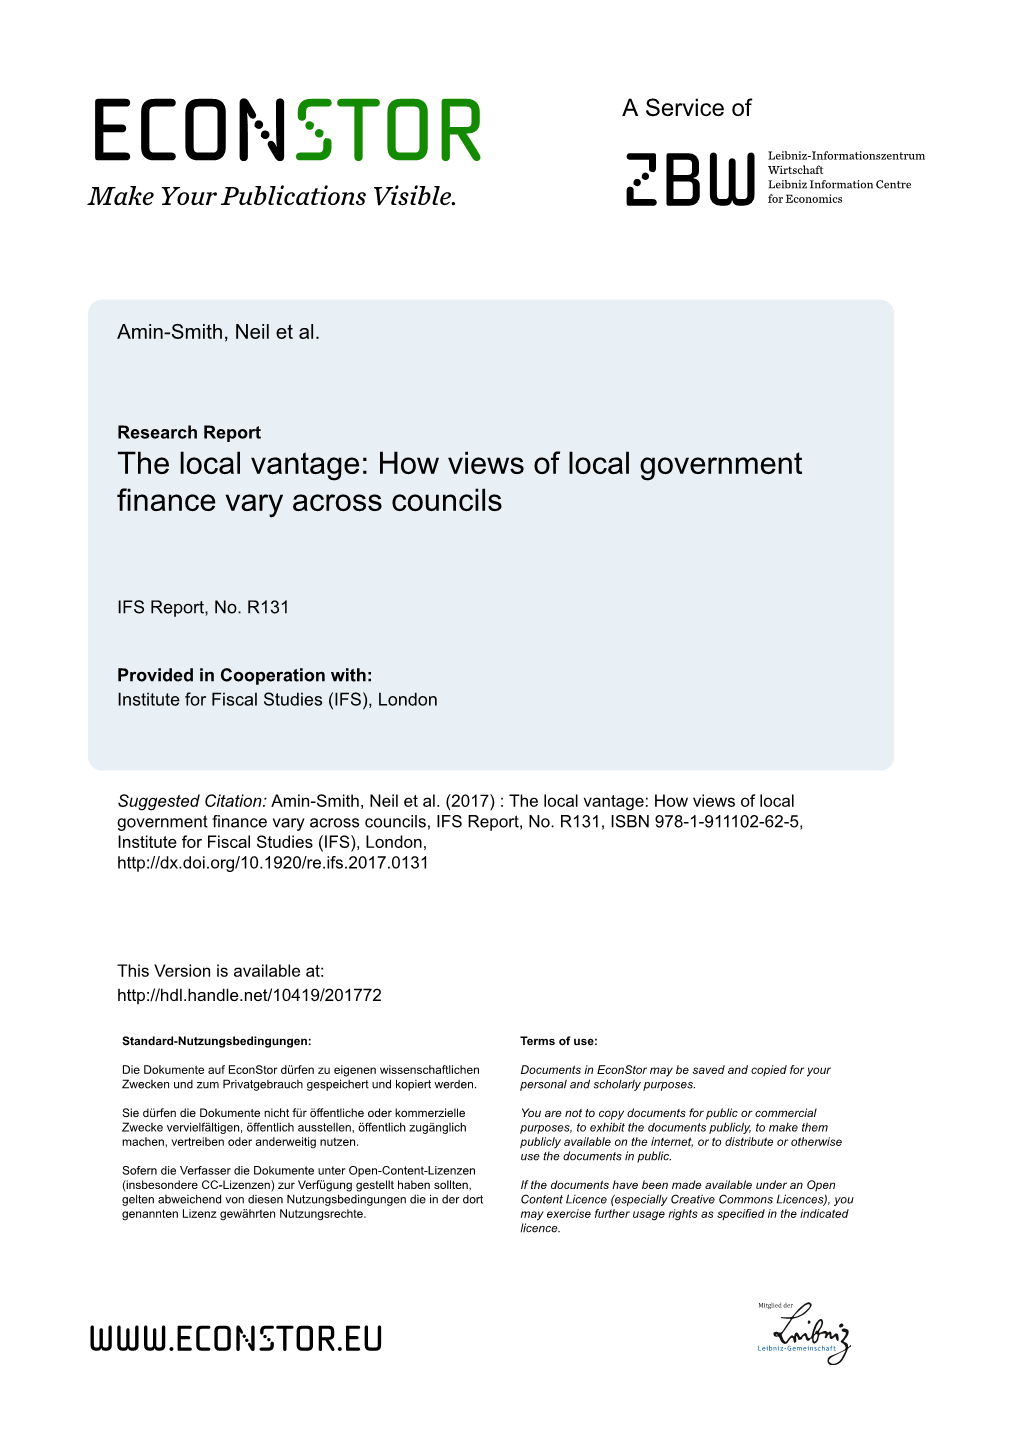 How Views of Local Government Finance Vary Across Councils